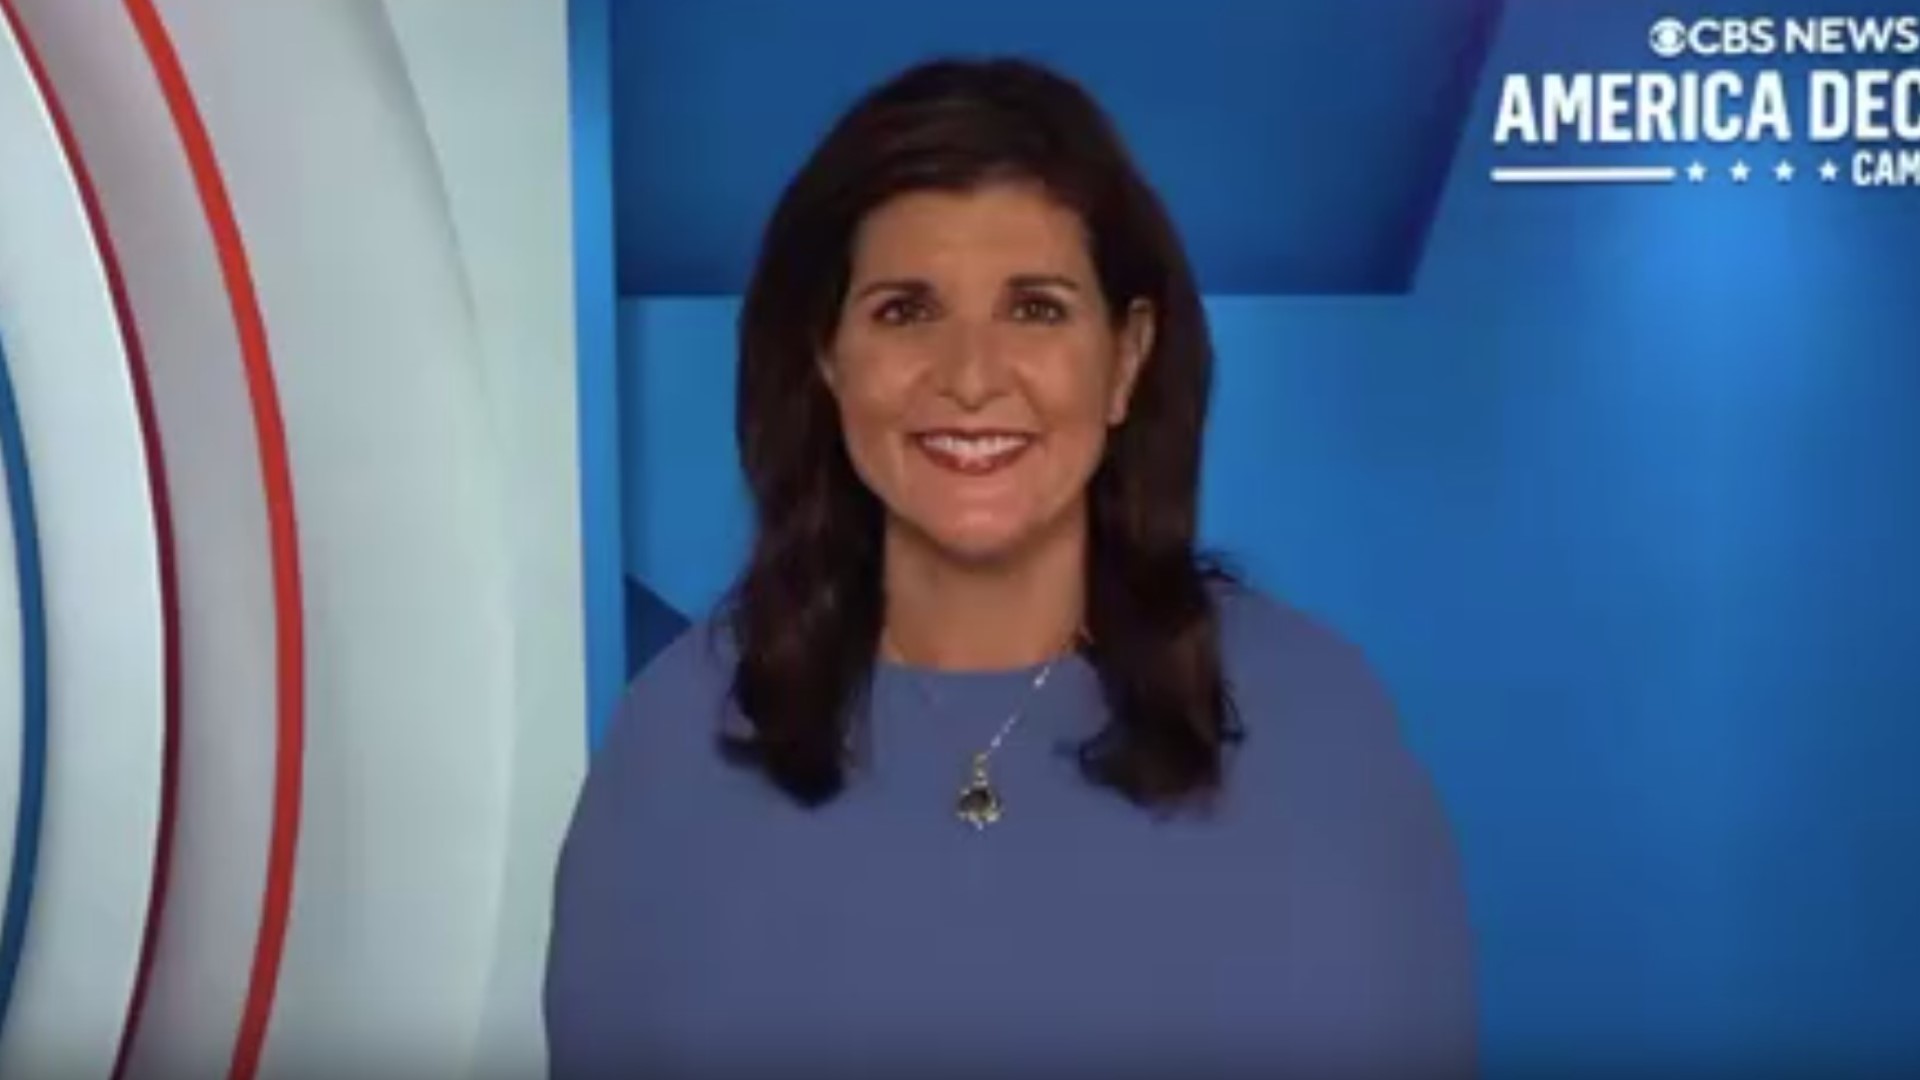 GOP presidential candidate Nikki Haley appeared on CBS Morning show the morning after the first GOP debate